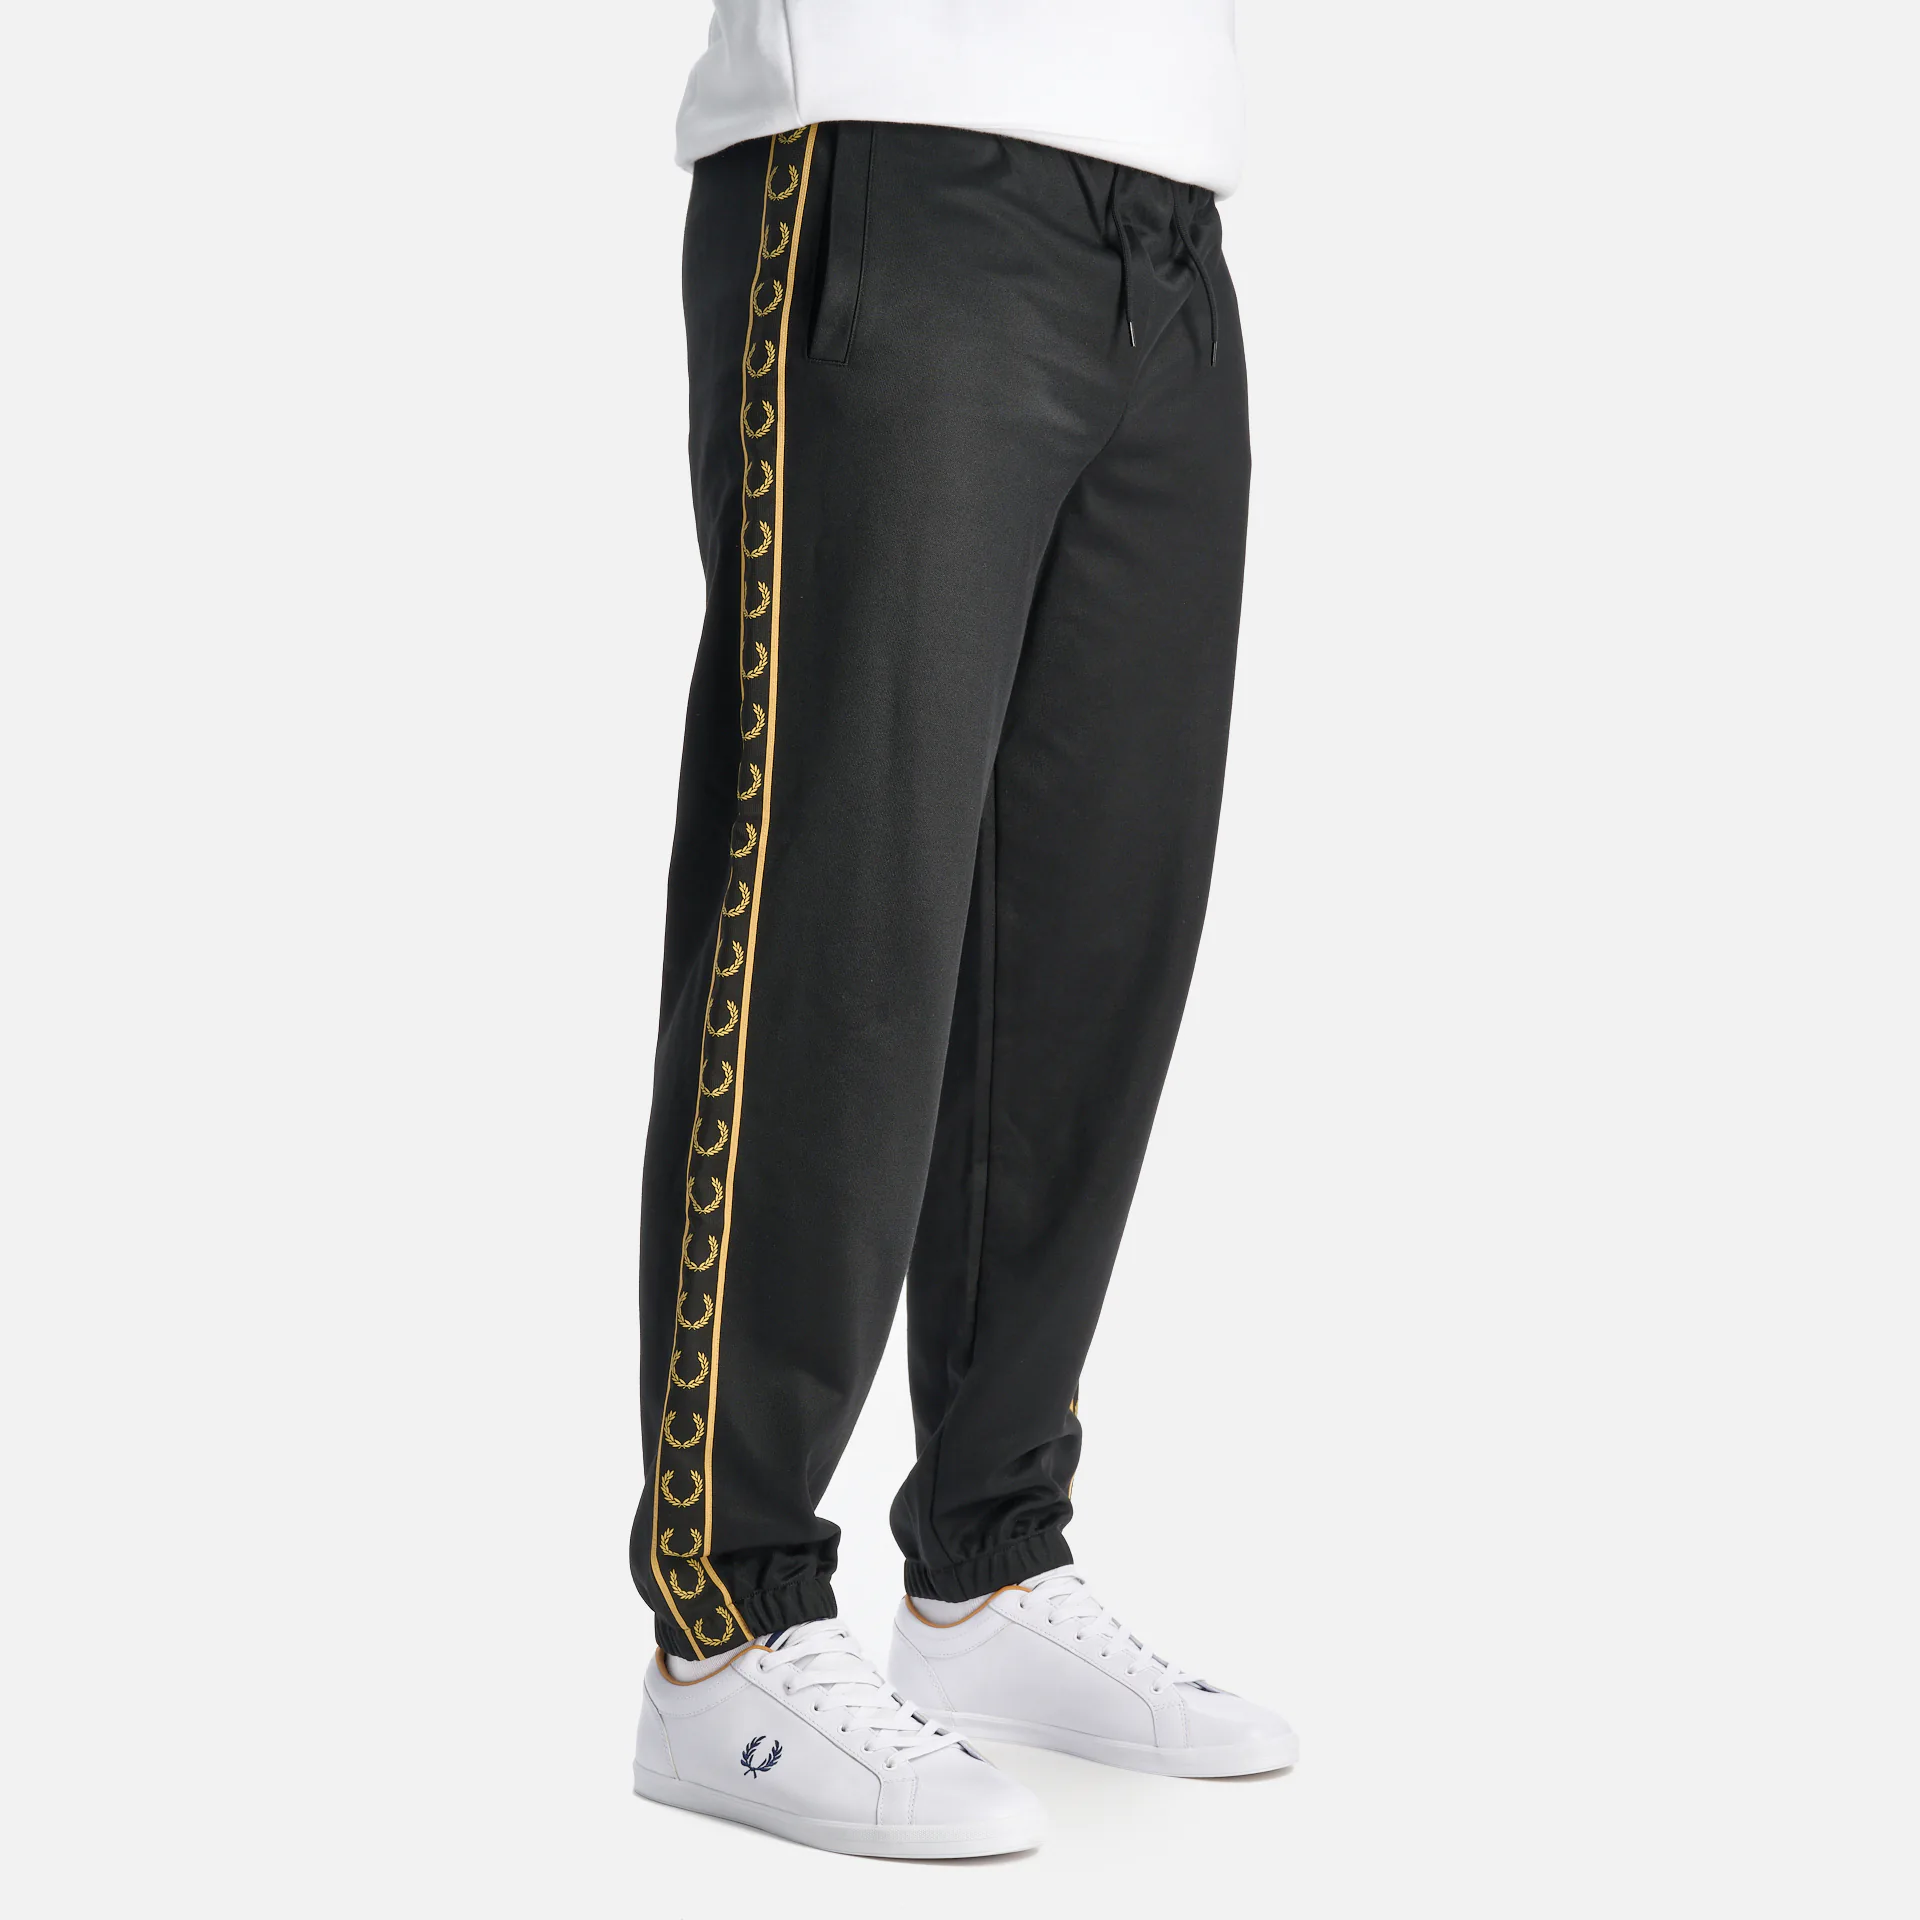 Fred Perry Seasonal Taped Track Pant Black/1964 Gold